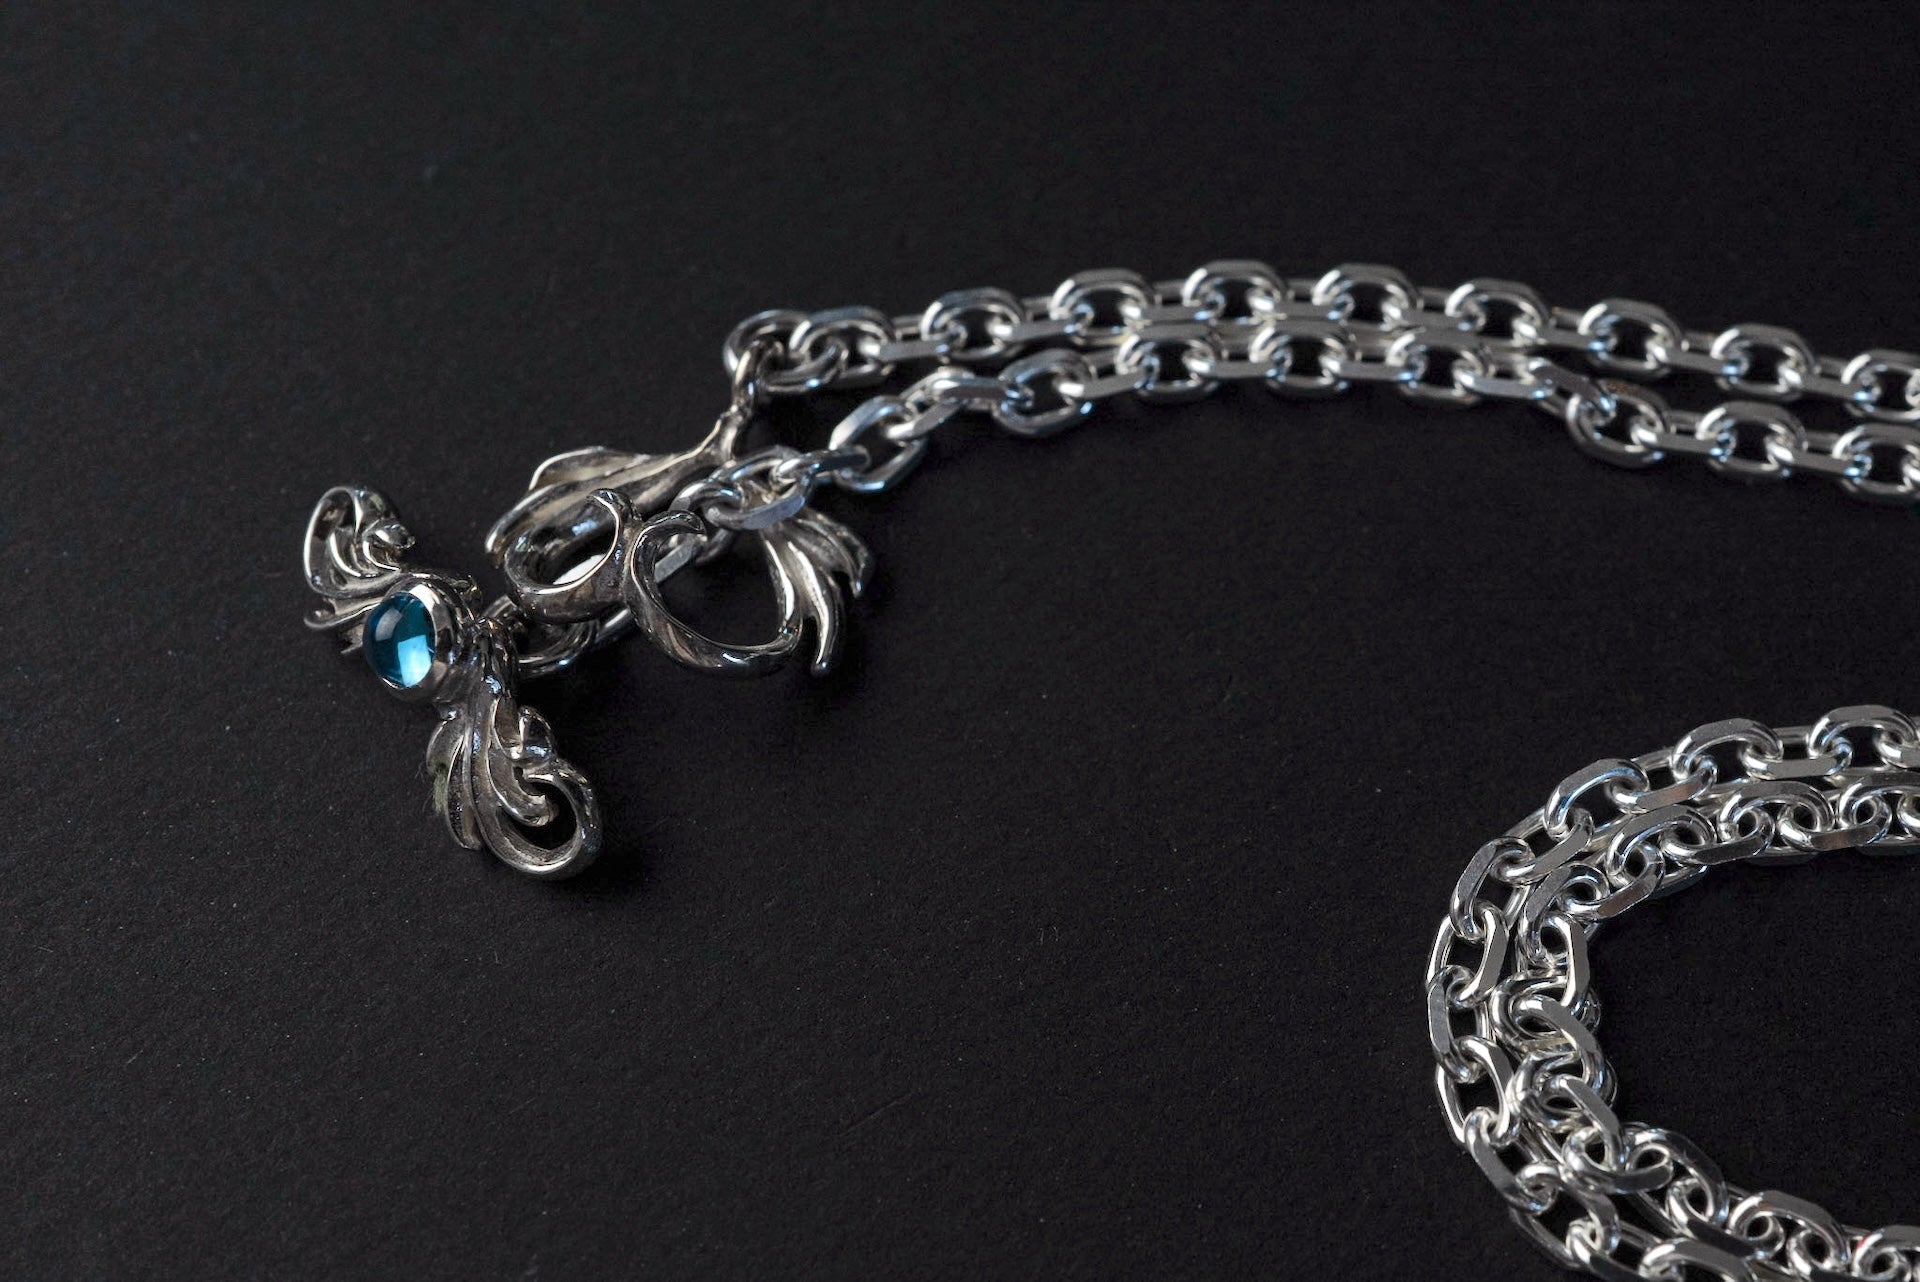 Legend "Heart" Silver Chain with Blue Topaz